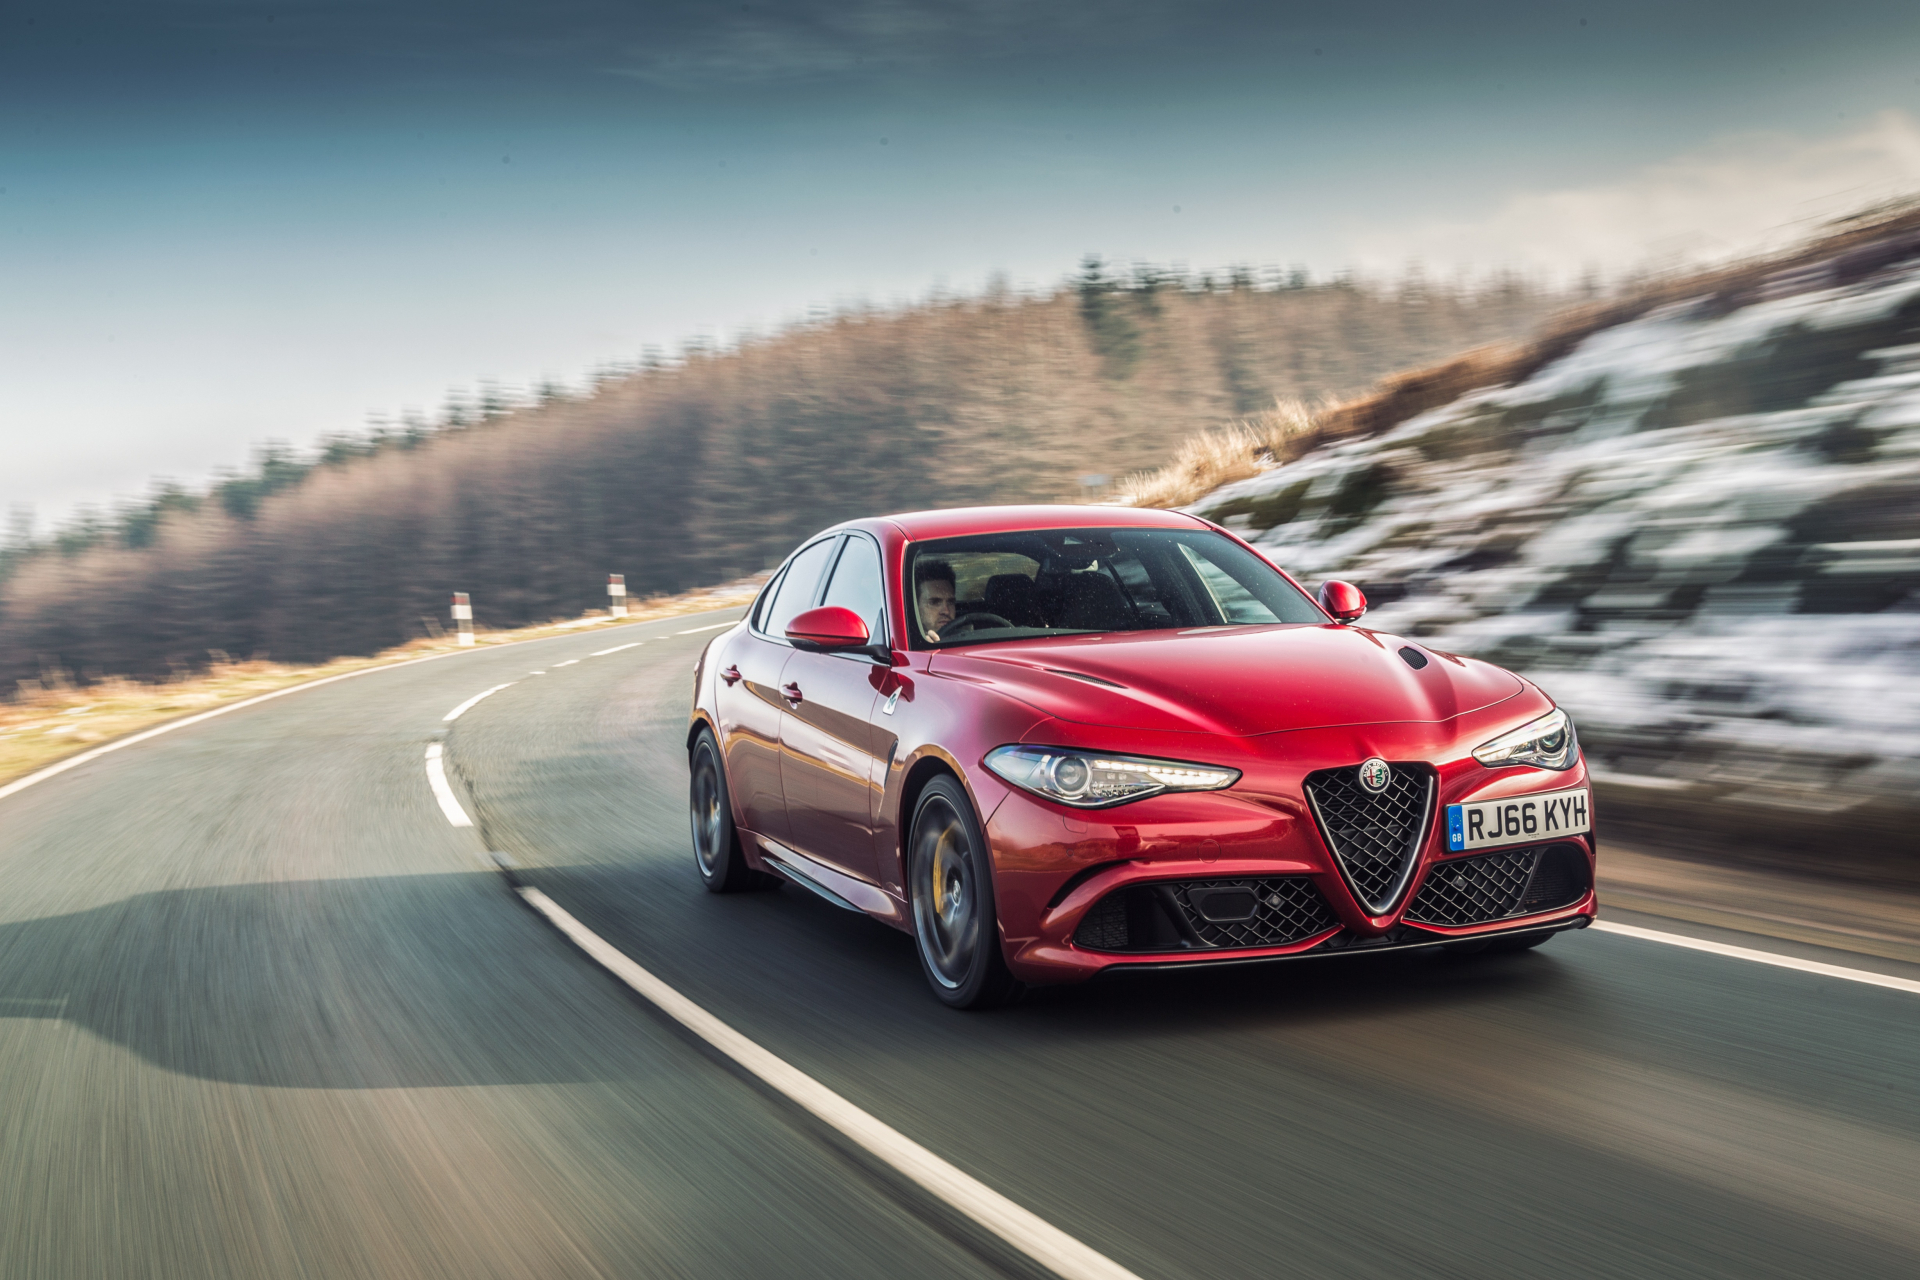 Alfa Romeo Giulia’s Safety and Driver-Assistance Features